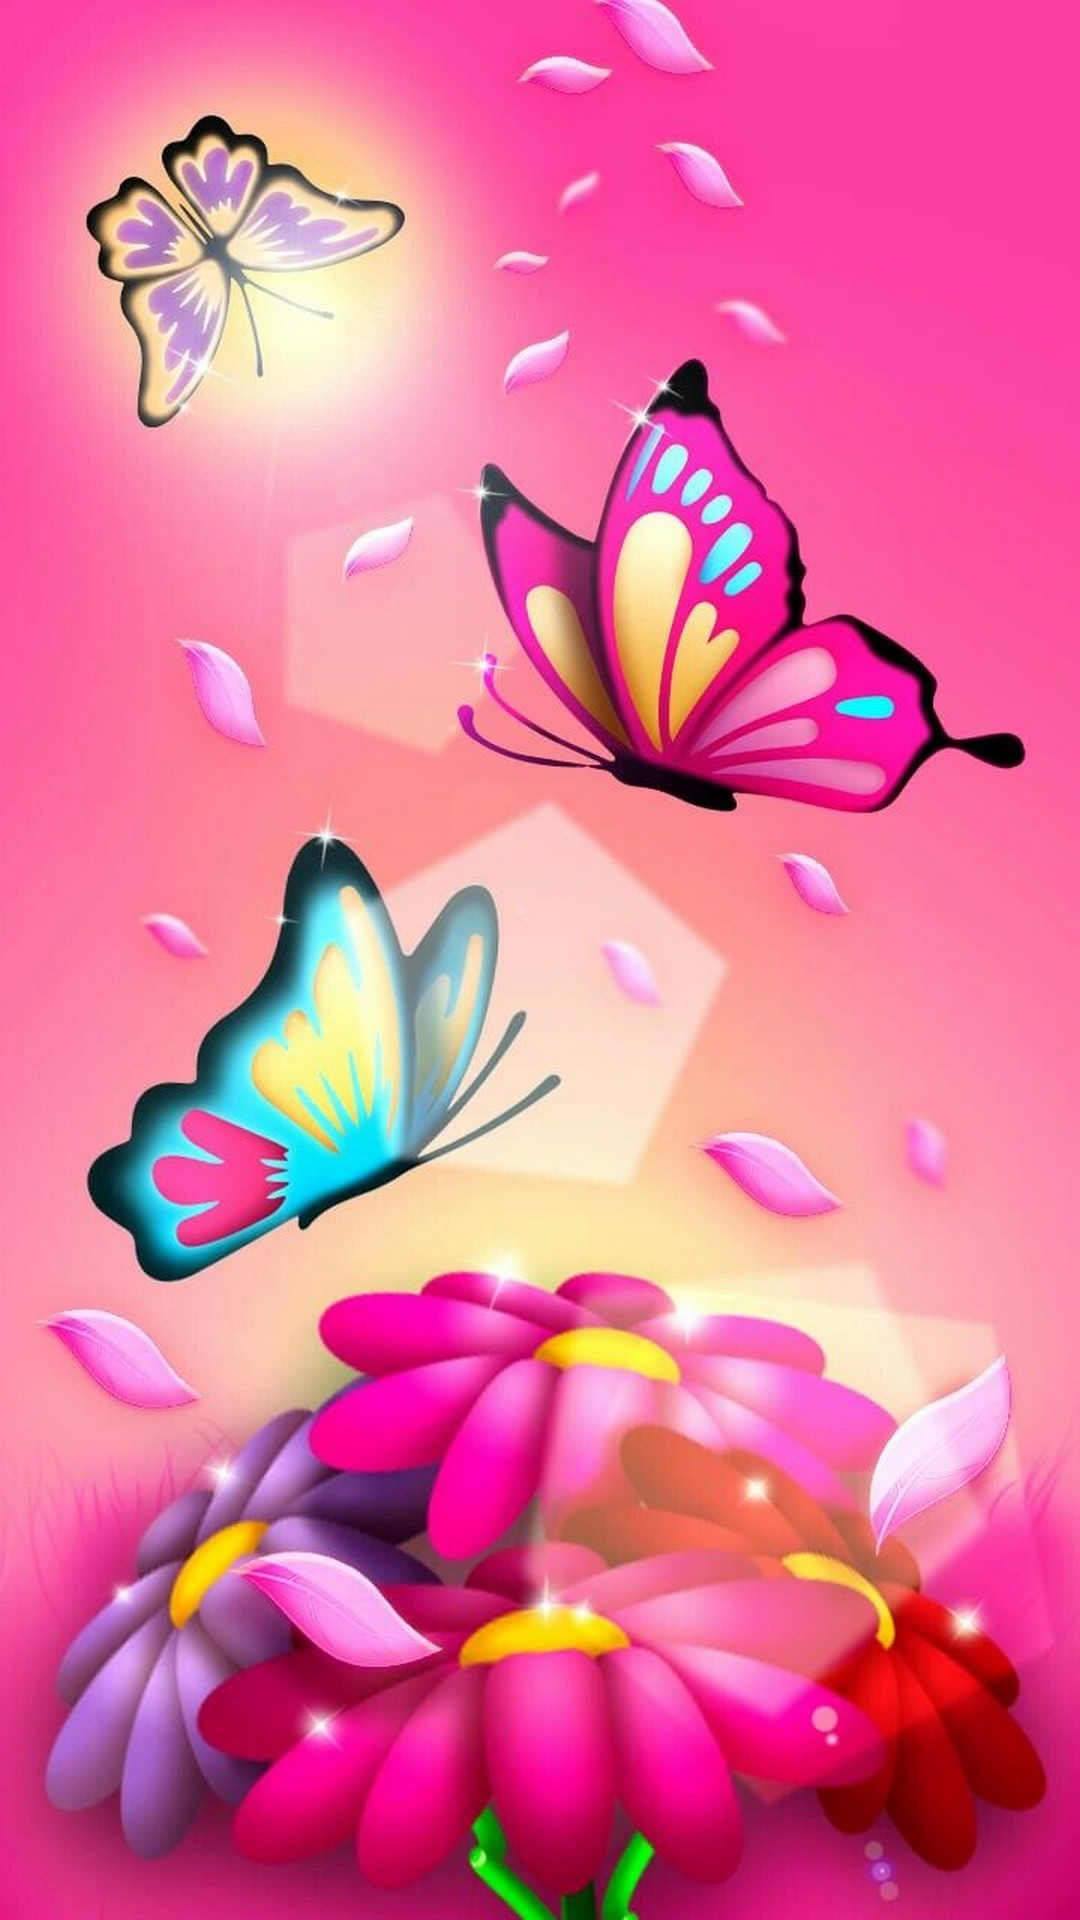 Wallpaper Android Pink Butterfly with HD resolution 1080x1920